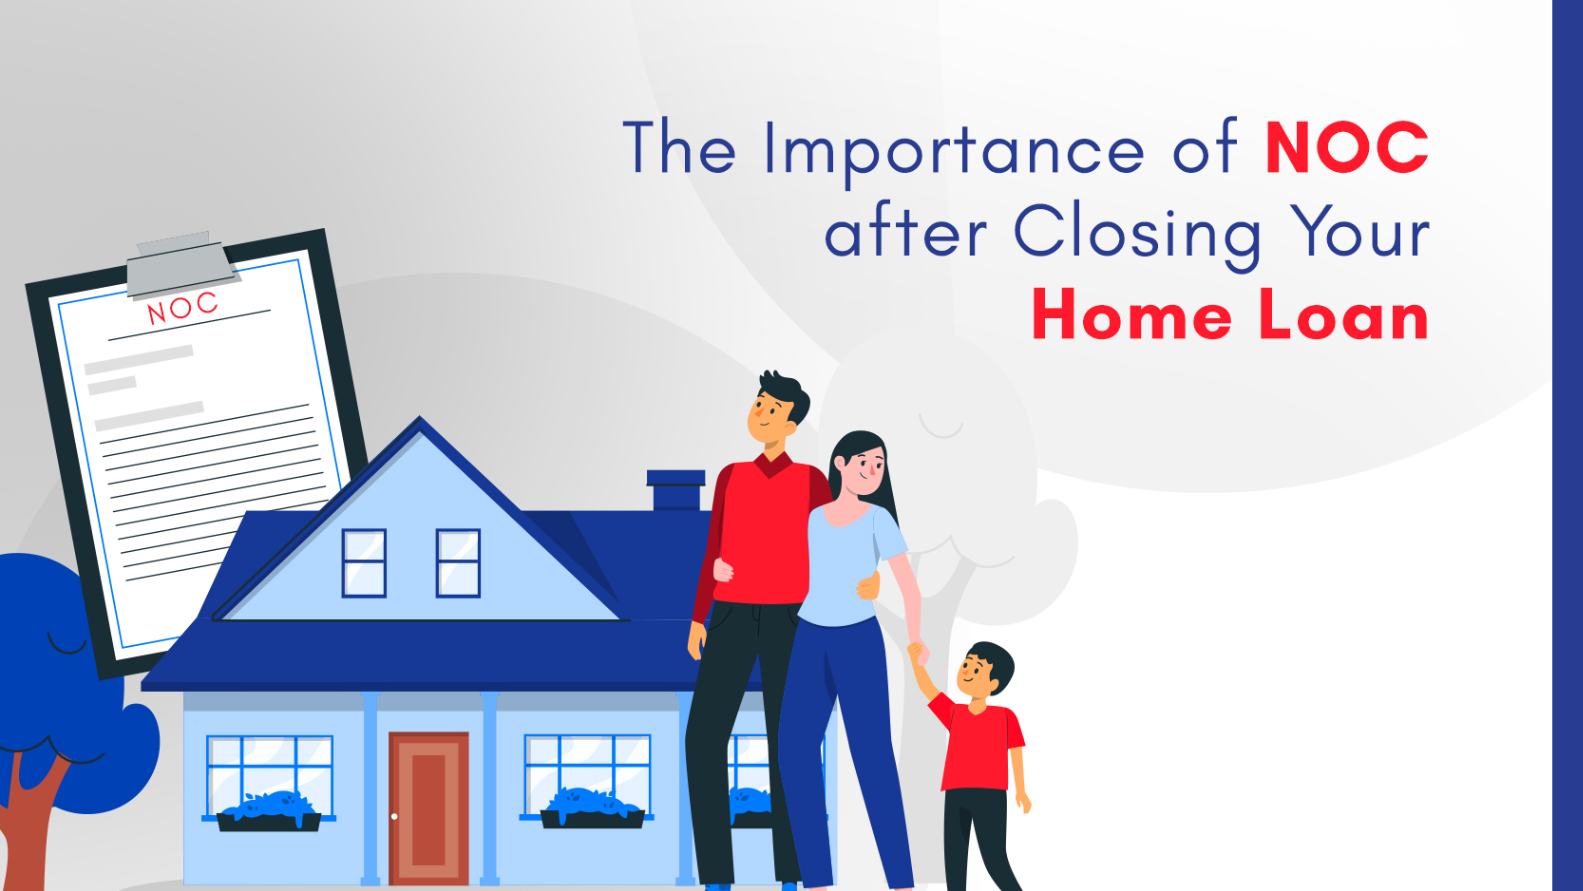 The Importance of NOC after Closing Your Home Loan